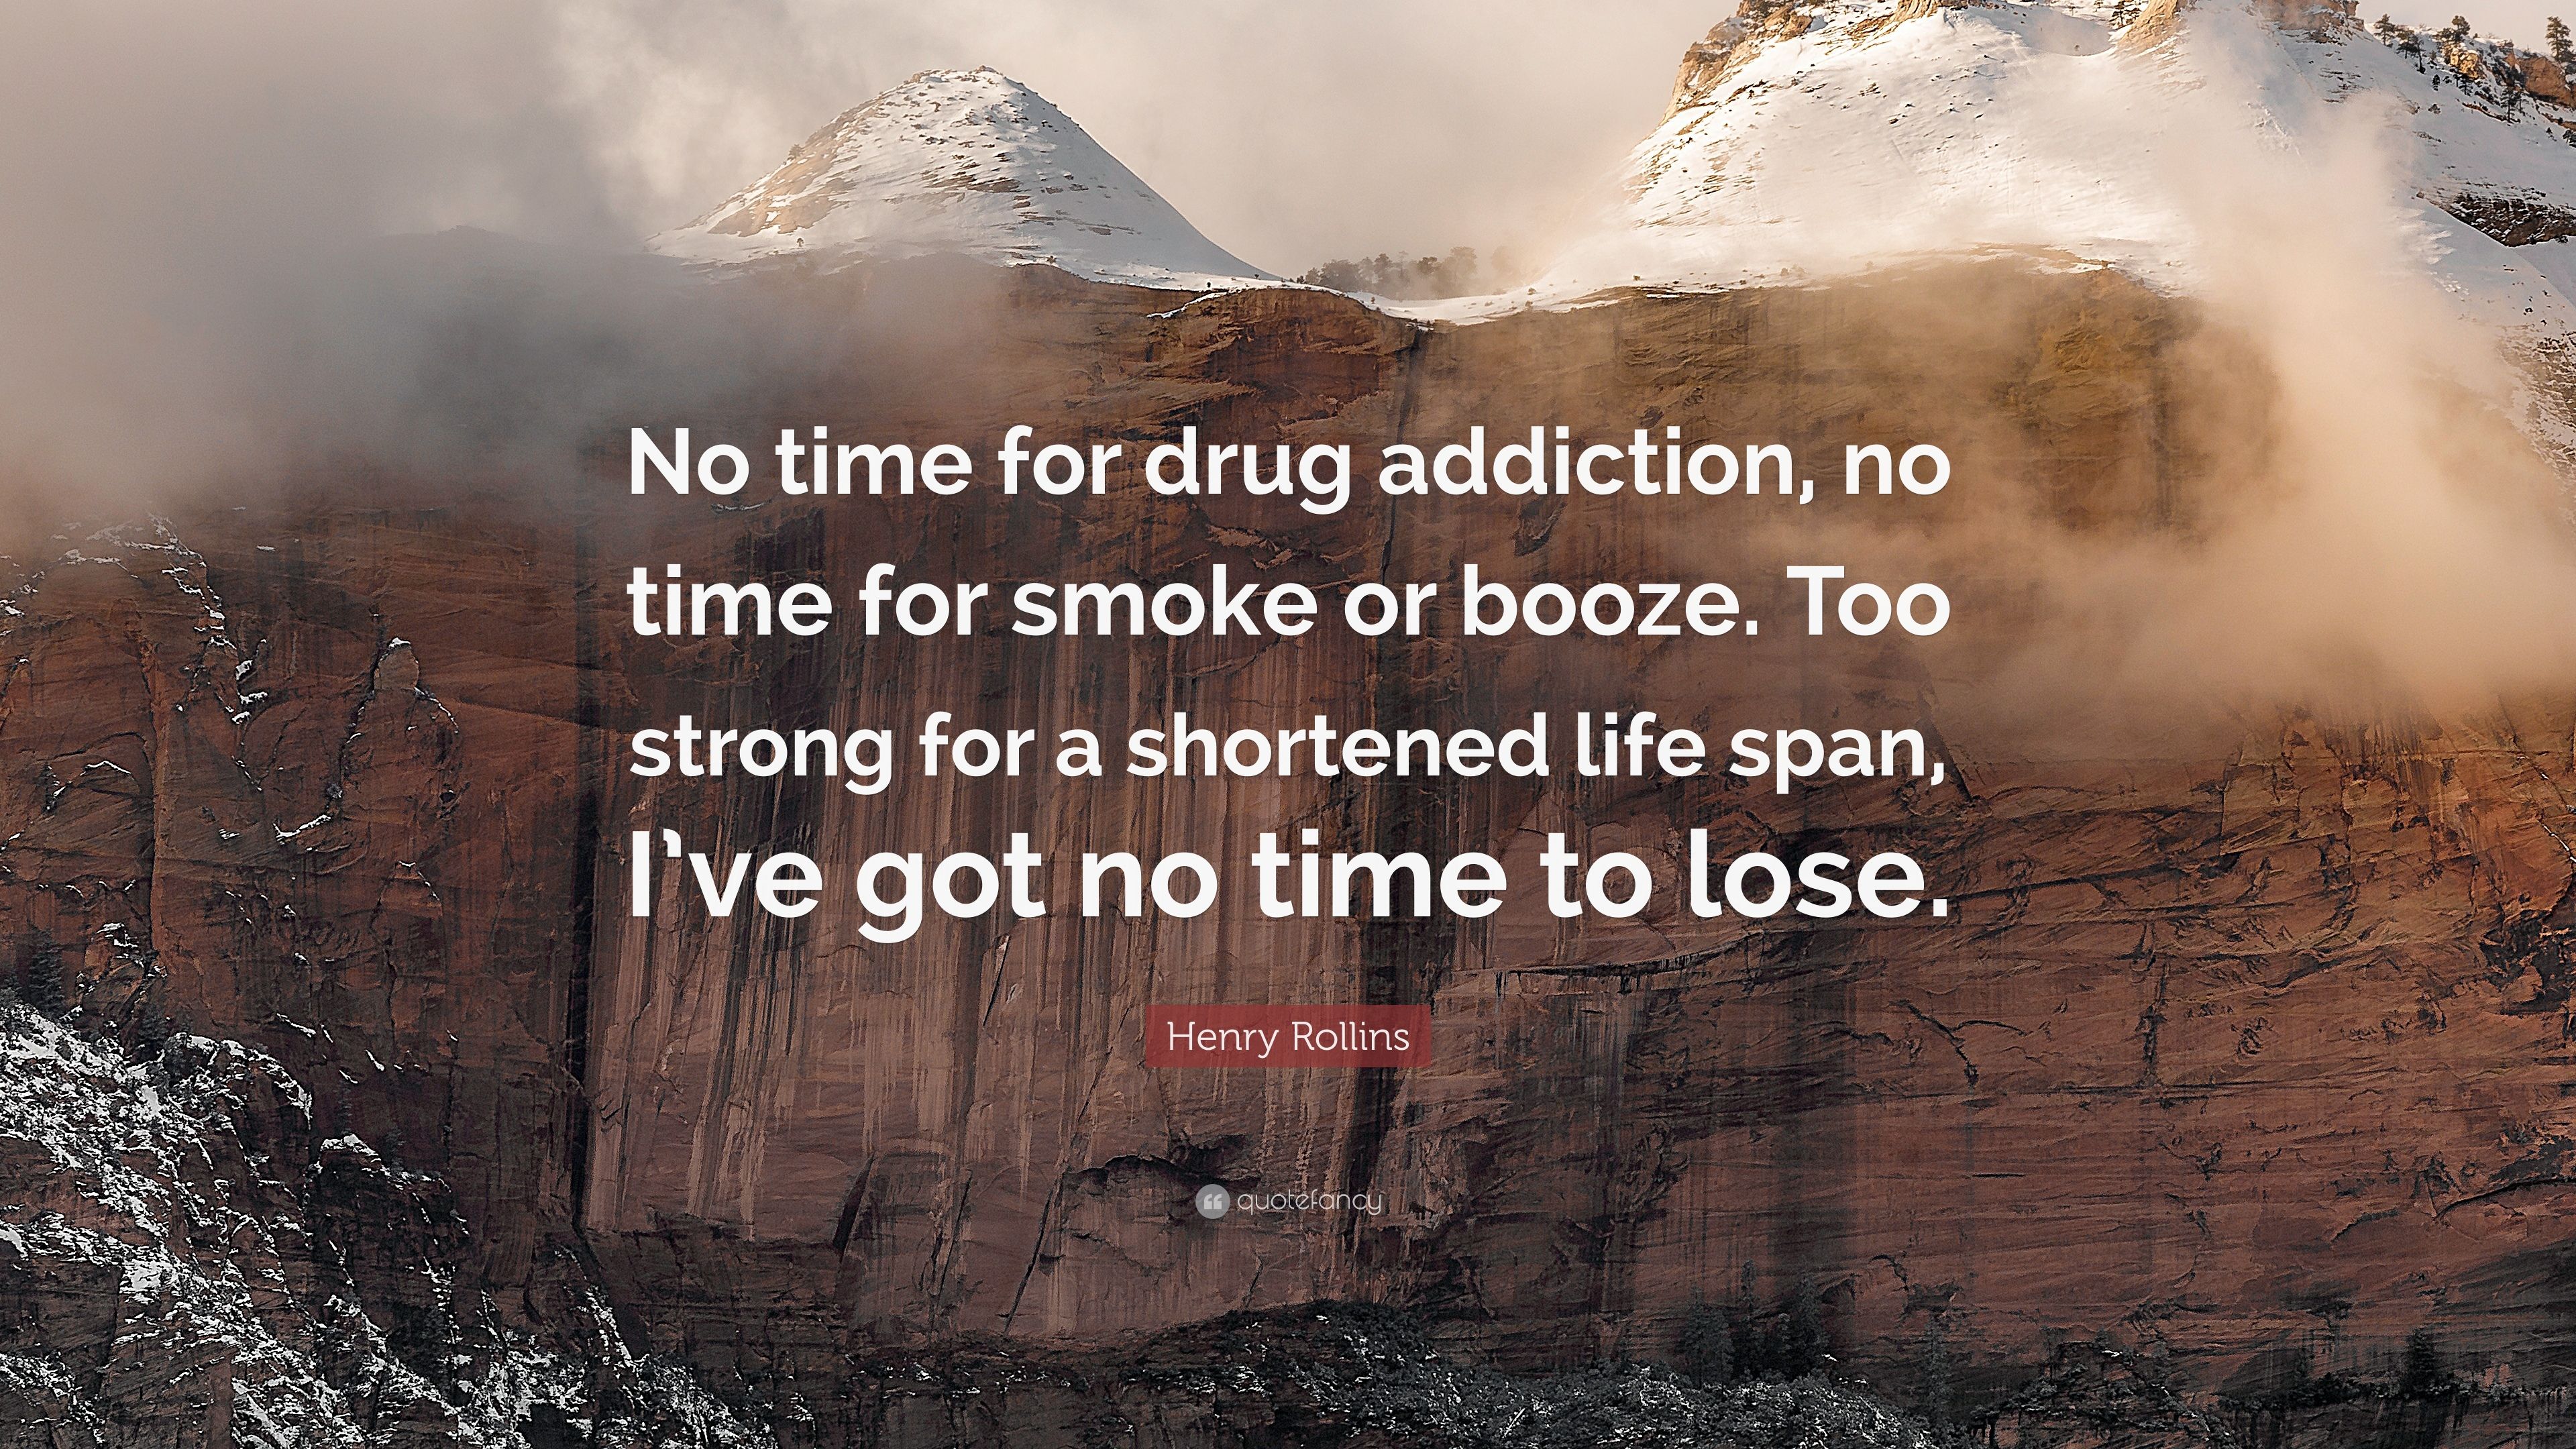 Henry Rollins Quote: “No time for drug addiction, no time for smoke